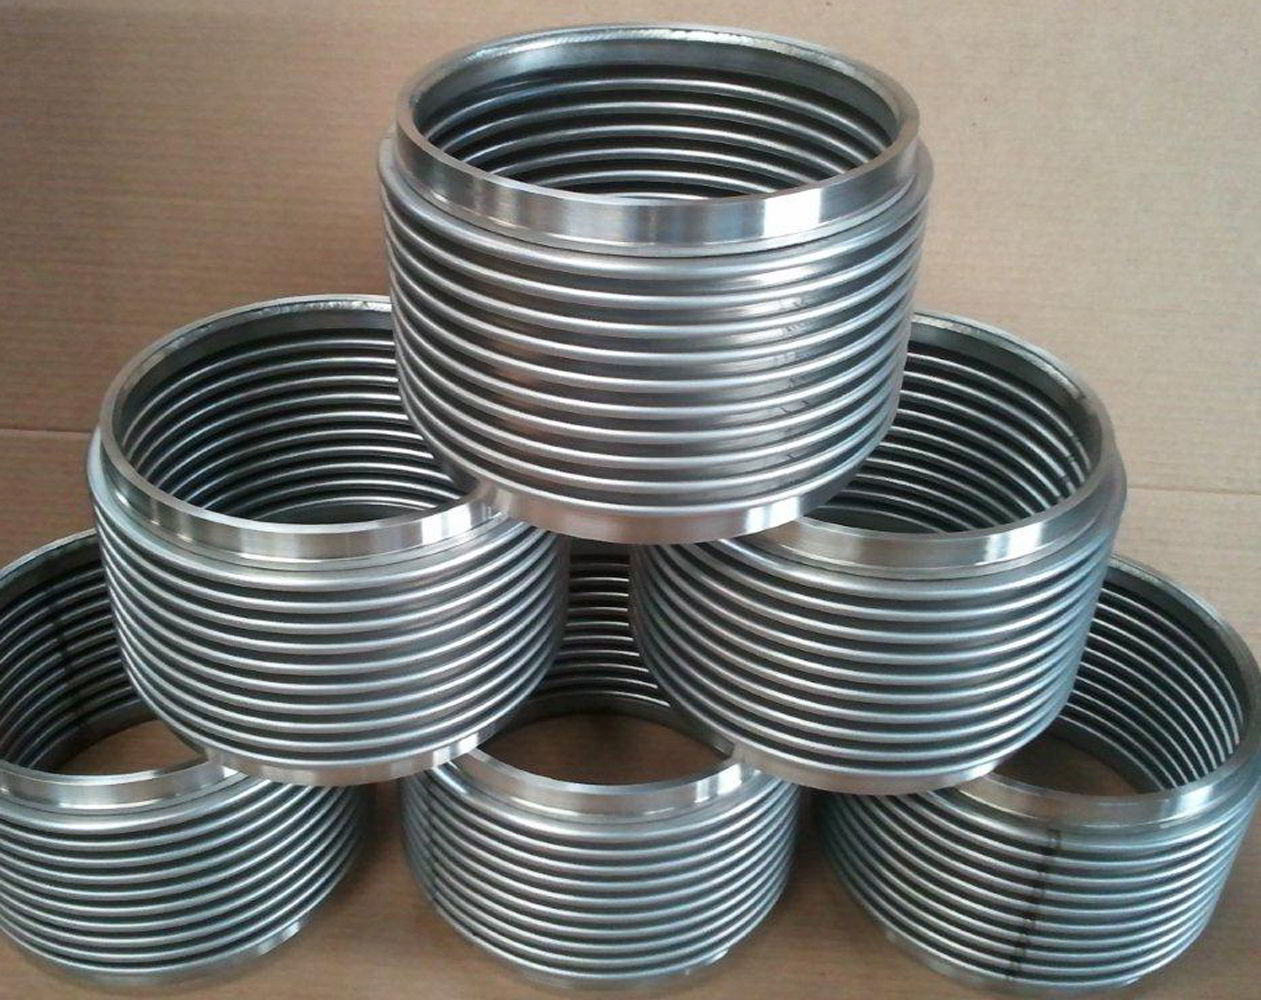 8 Inch Inconel 625 Bellows with Special Machined Ends